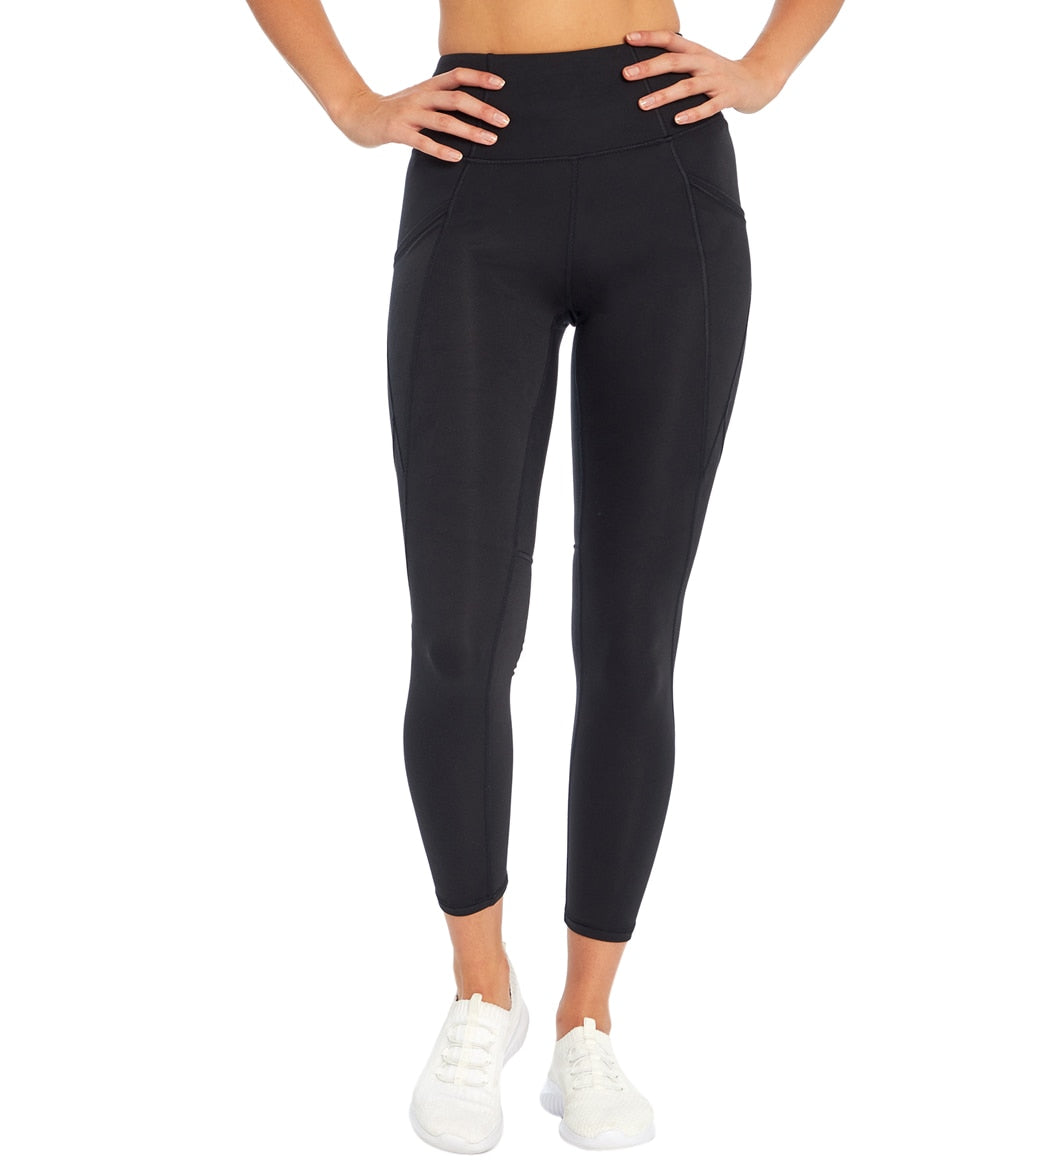 Balance Collection Haven High Waisted Yoga Leggings at